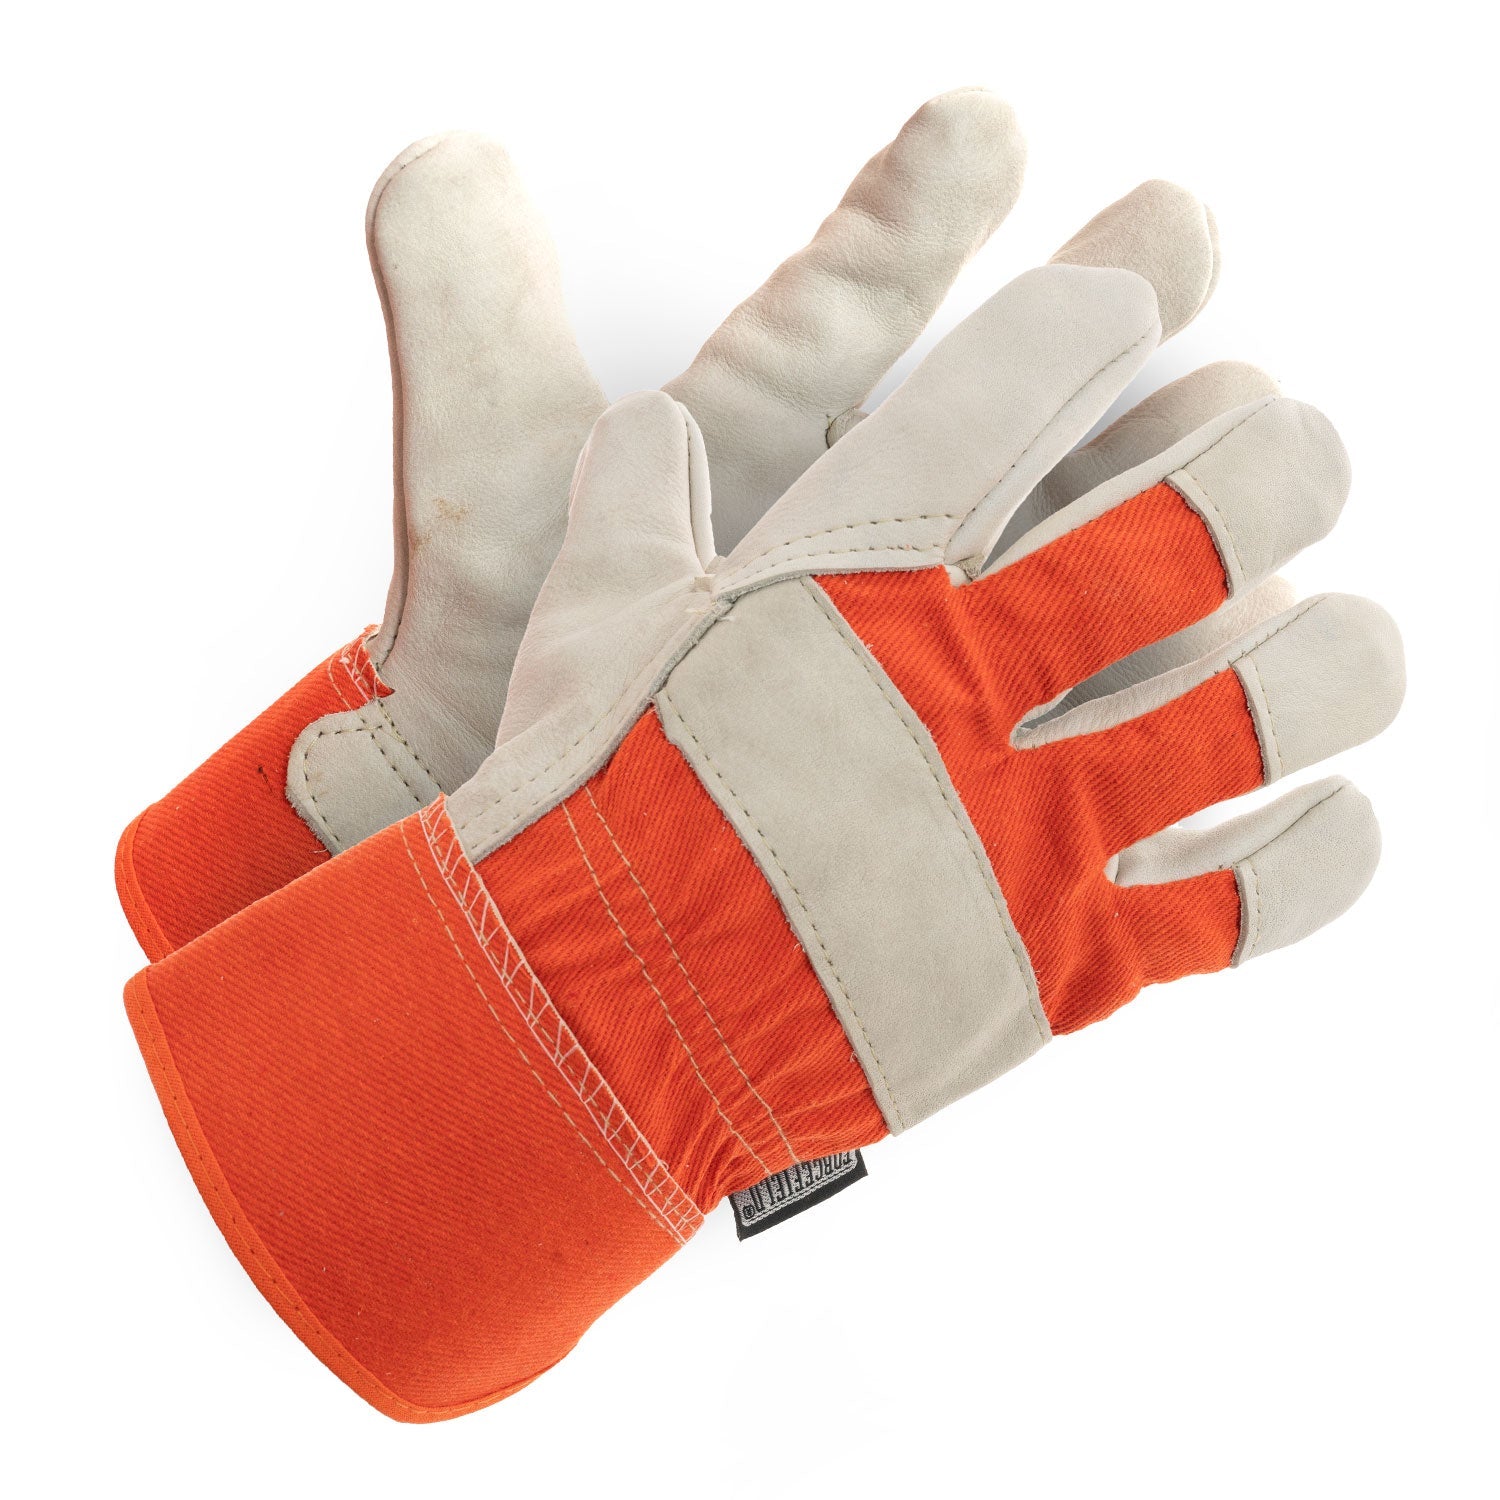 Grain Leather Work Glove with Rubberized Cuff